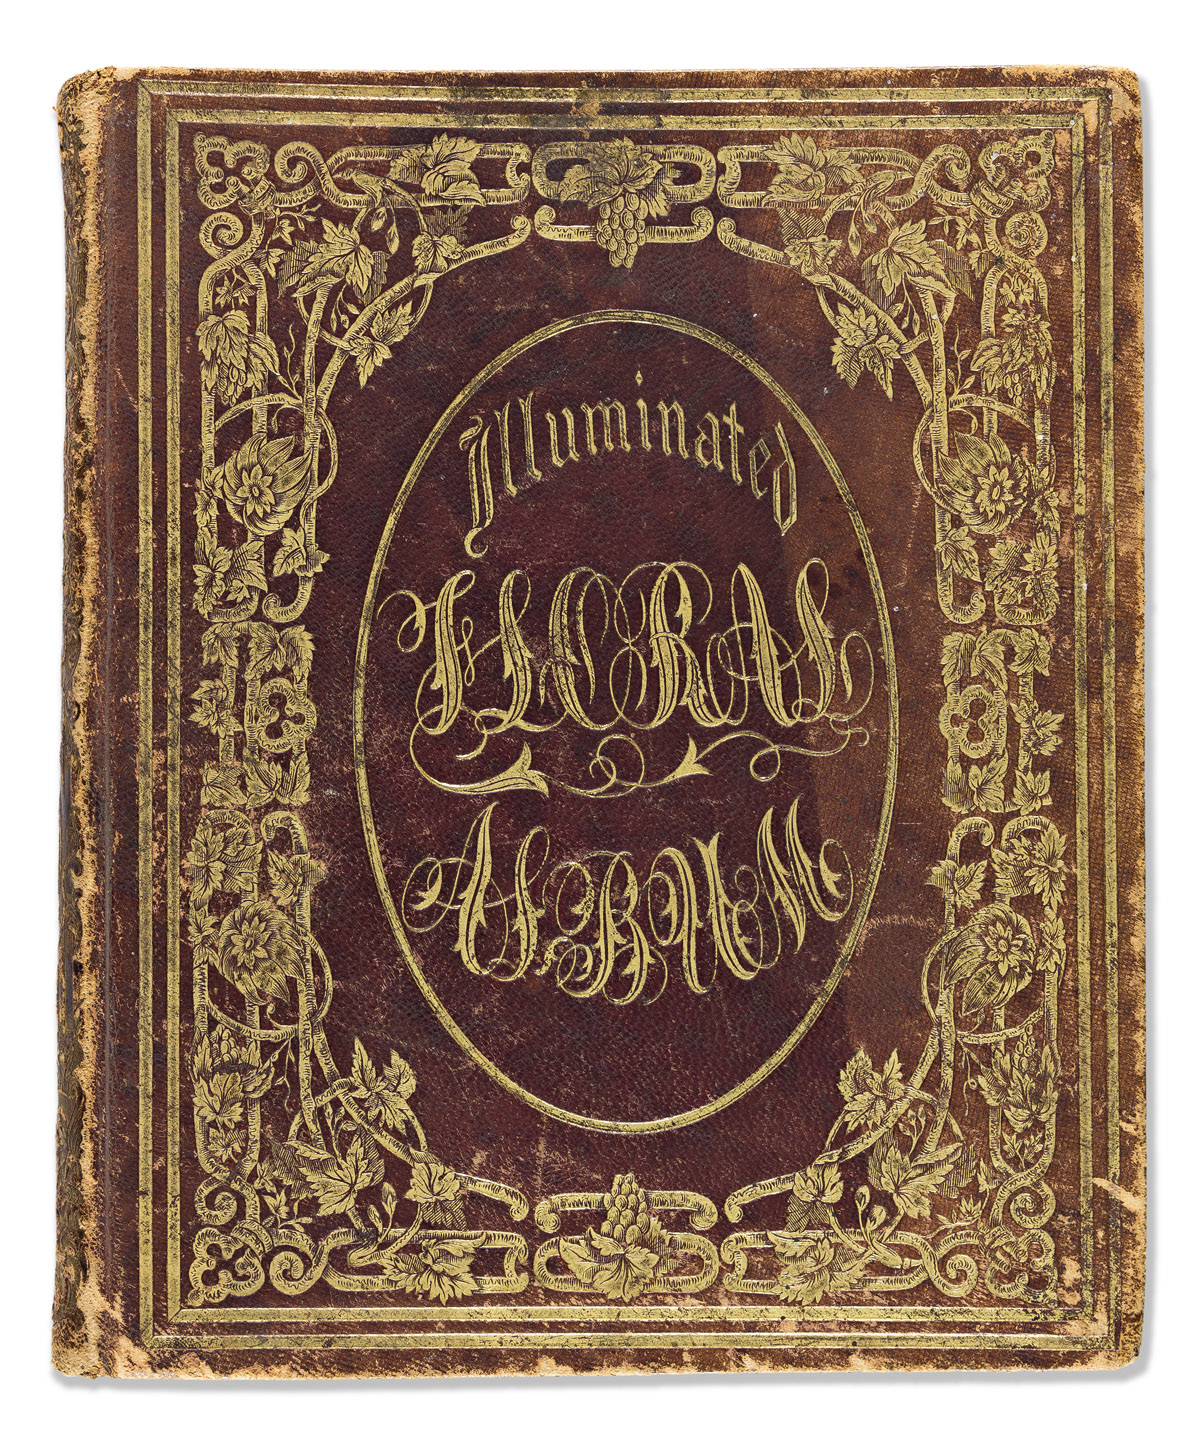 Dutton, Elizabeth Schooley (1839-1927) Two Autograph Books with her Signature and those of other Quakers from Waterford, Loudoun County